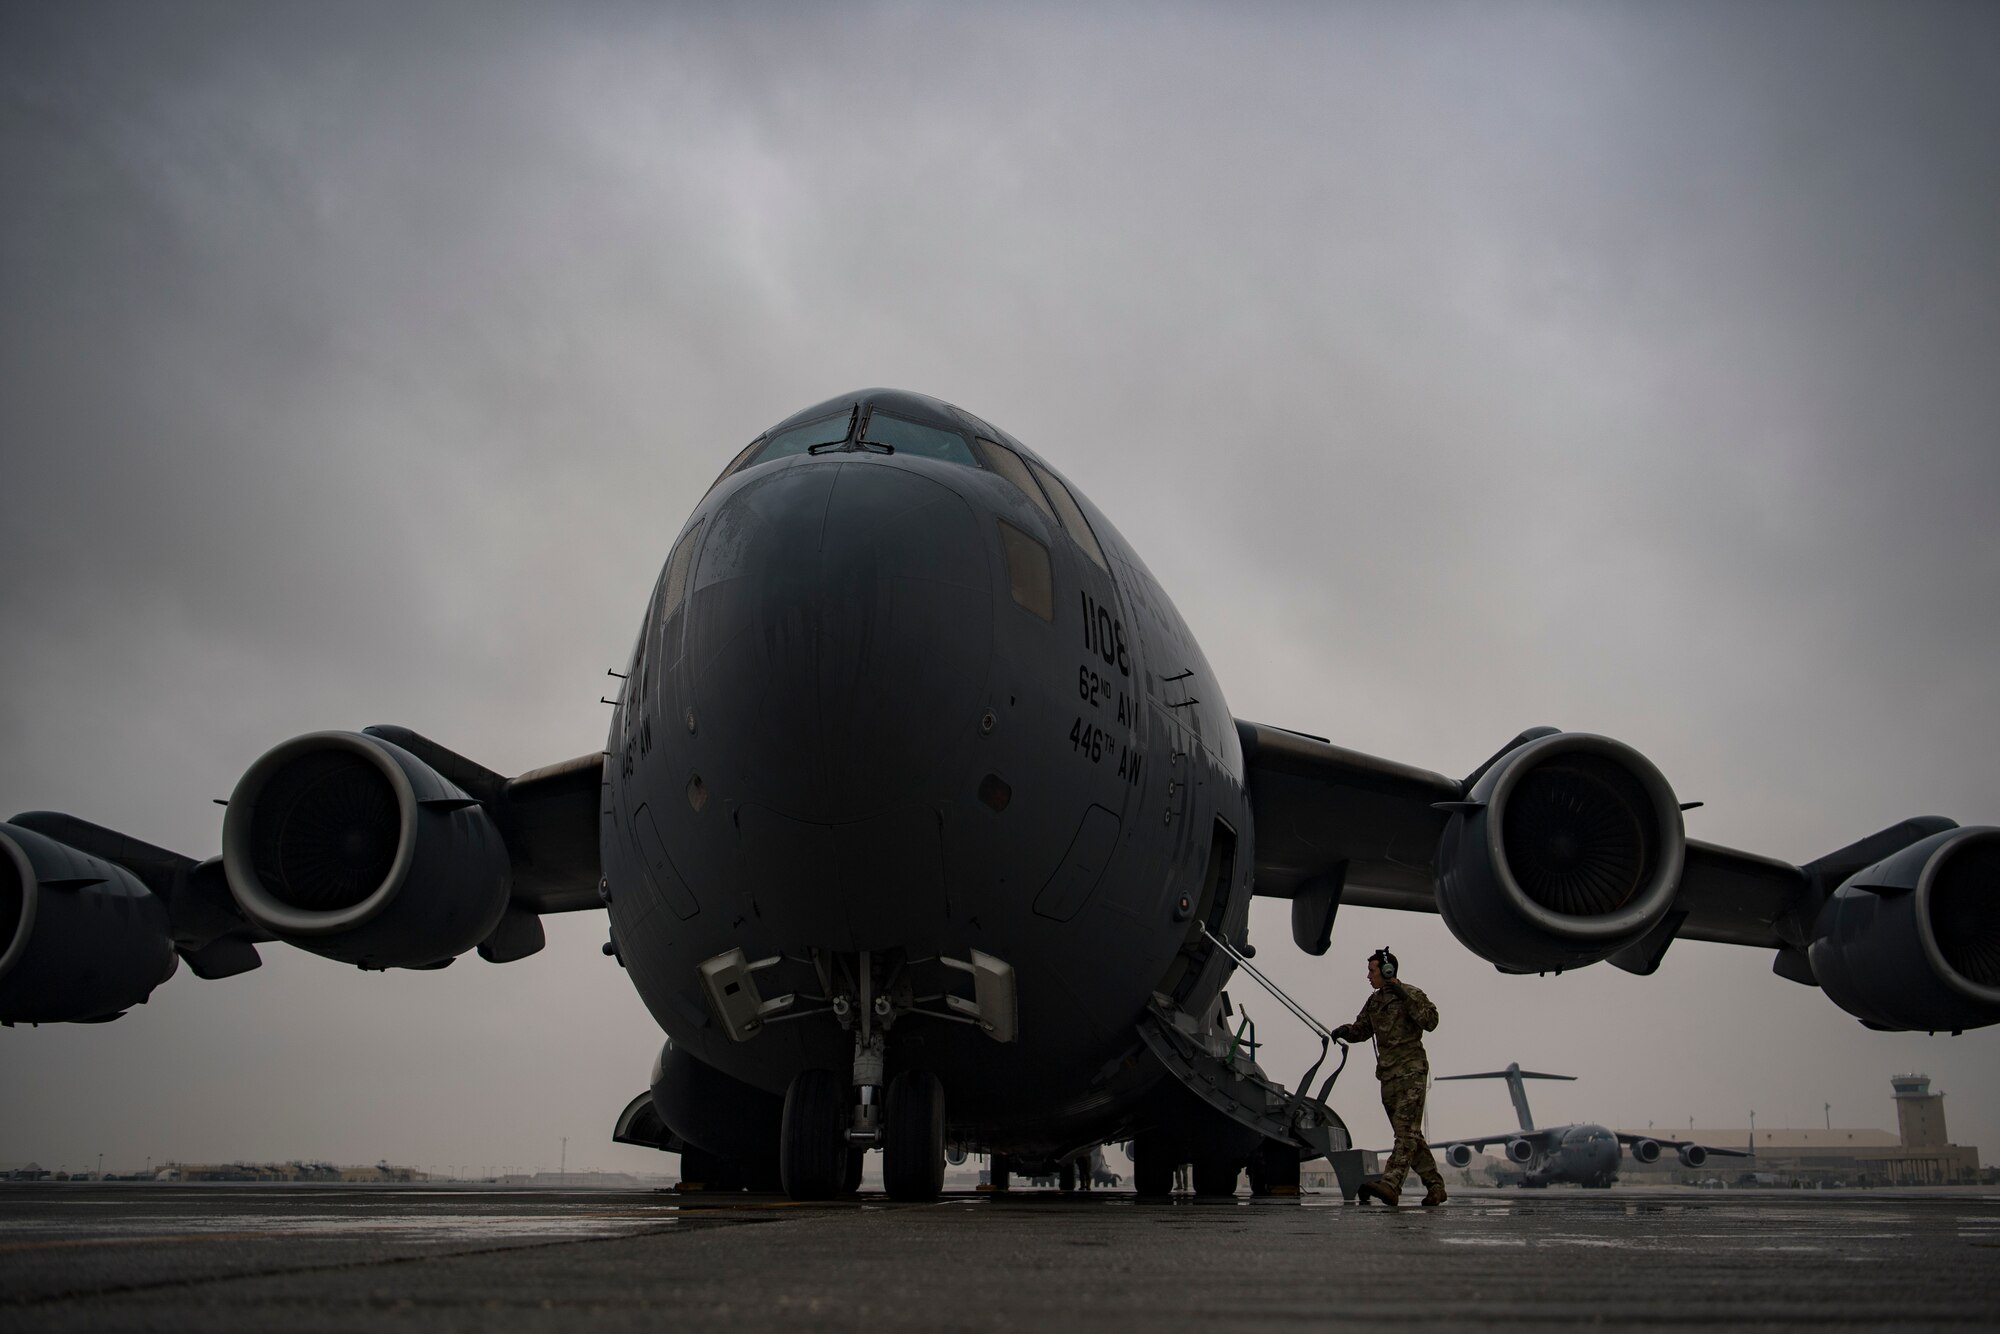 A U.S. Air Force C-17 Globemaster III pilot assigned to the 816th Expeditionary Airlift Squadron boards a C-17 at Al Udeid Air Base, Qatar, Jan. 10, 2020.